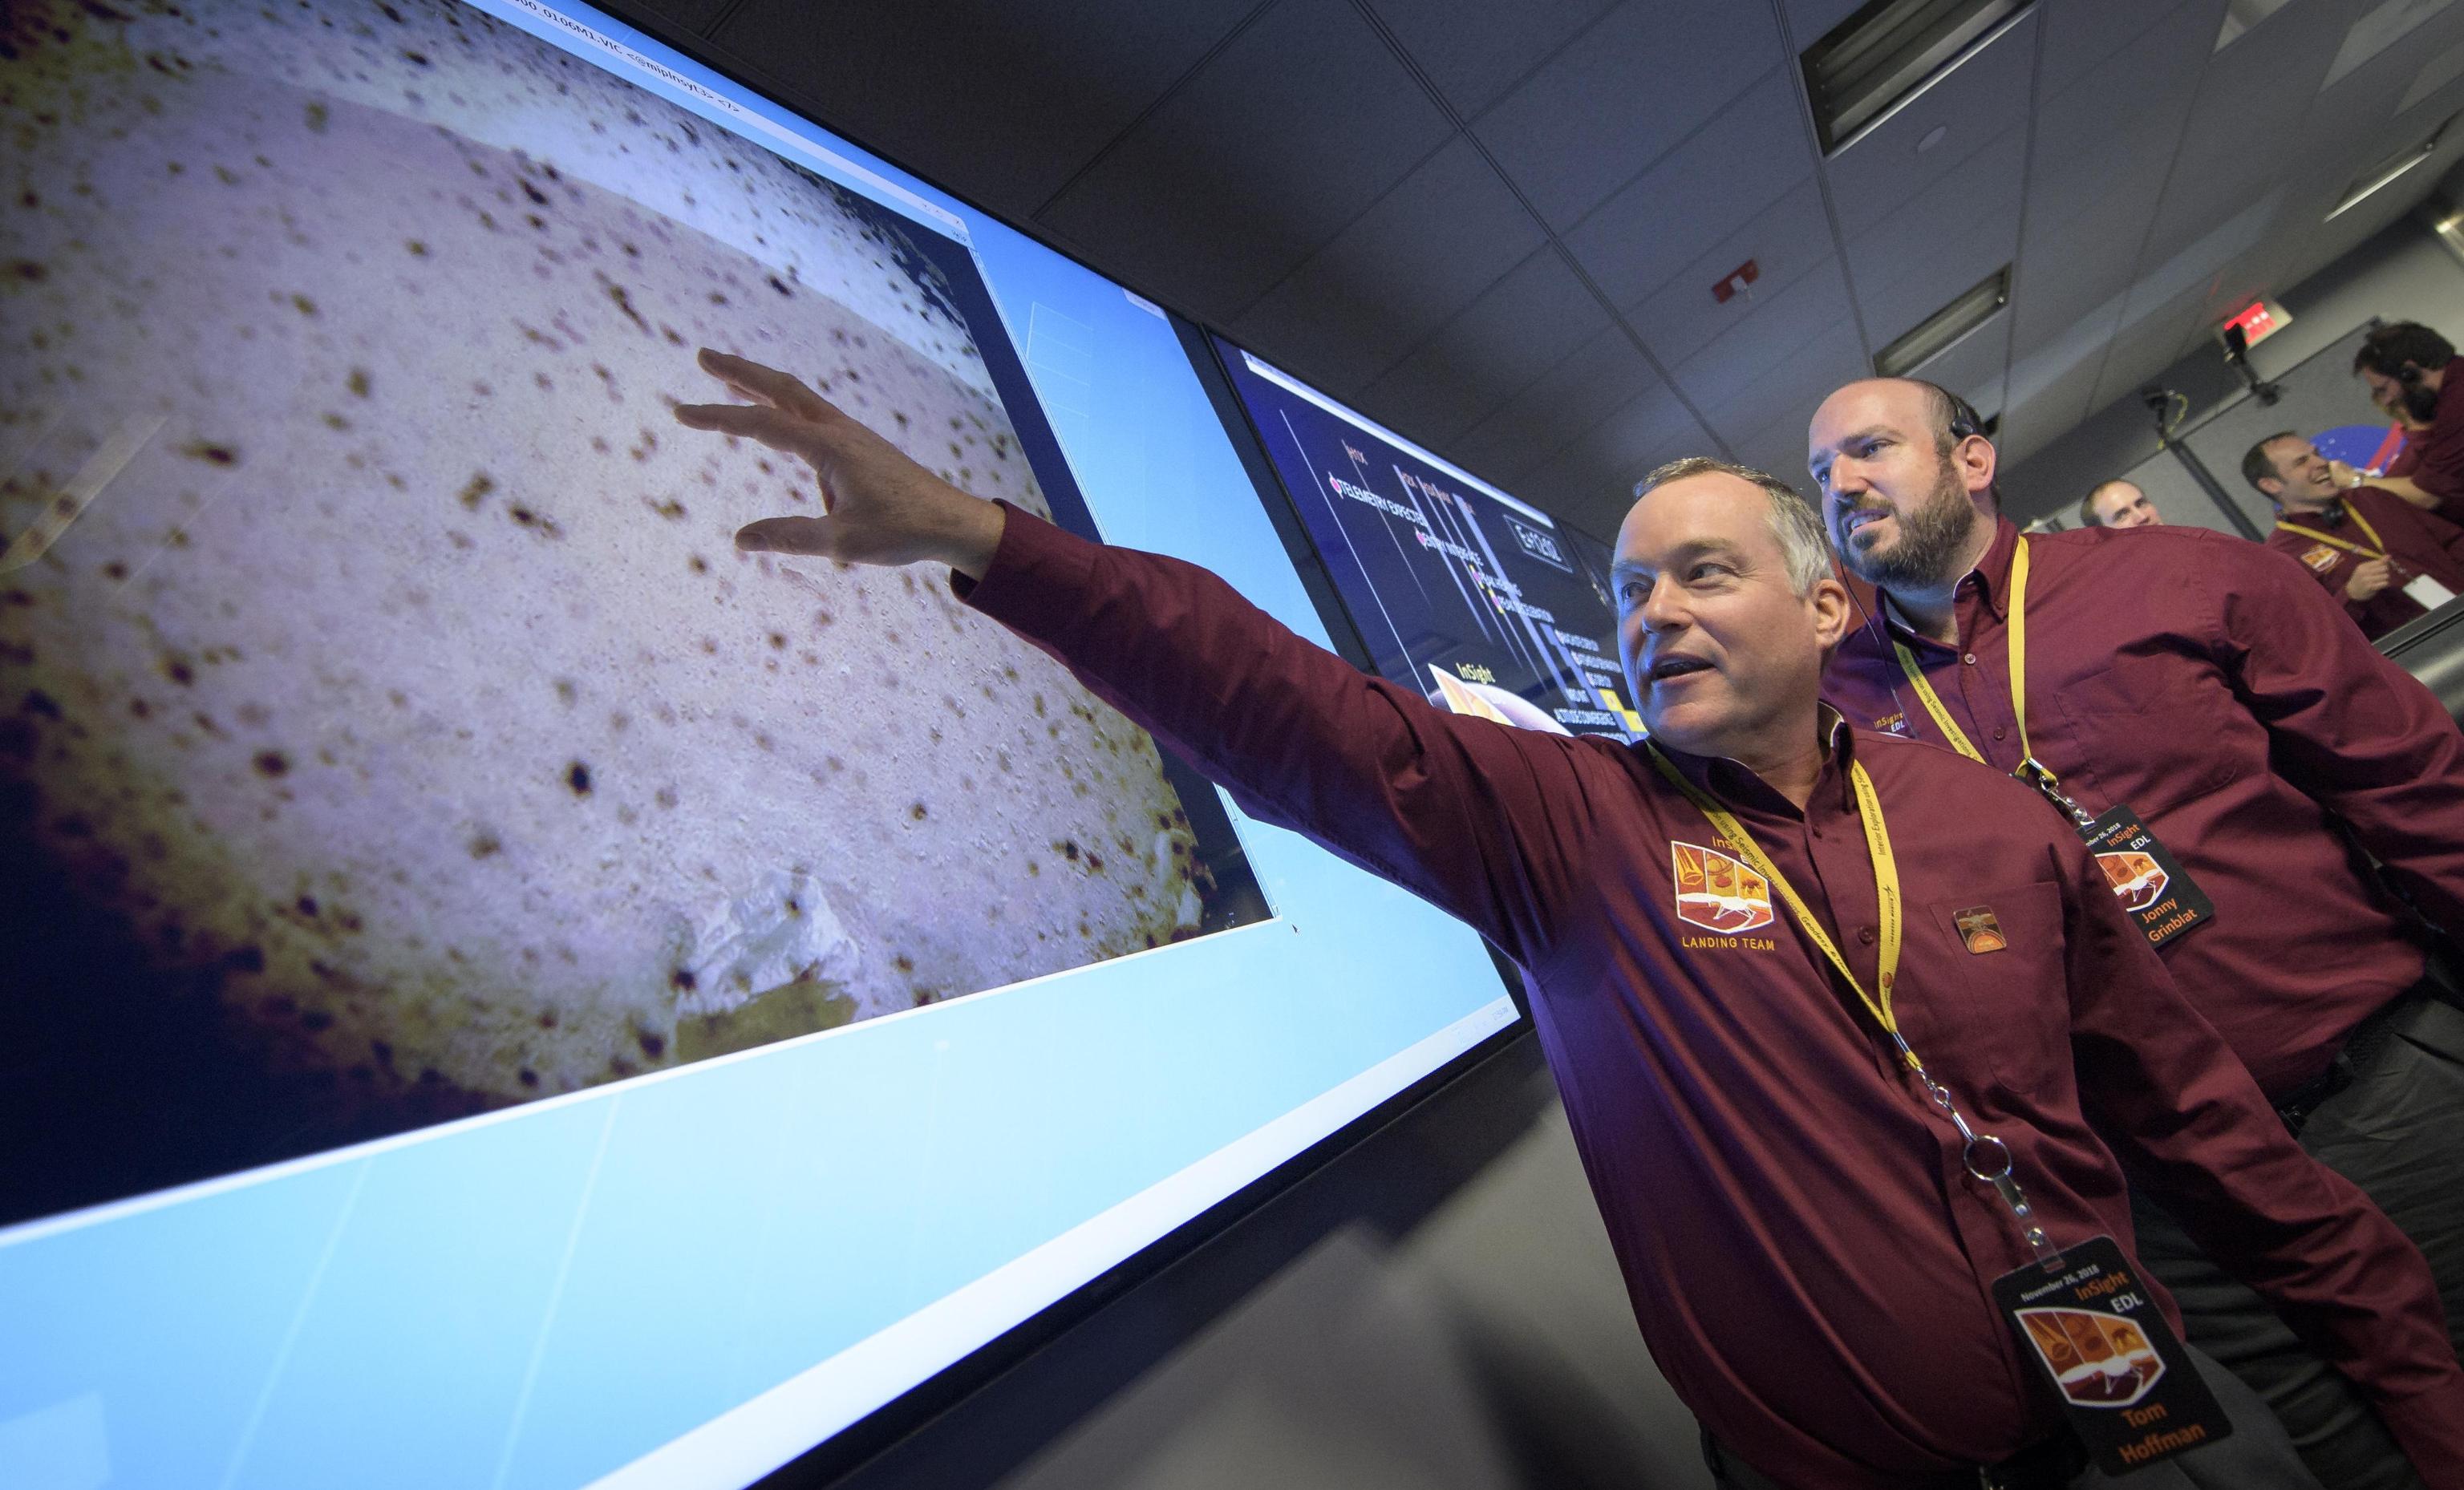 epa07191836 A handout photo made available by NASA shows Tom Hoffman, InSight Project Manager, NASA JPL reacts to the first image to be seen from the Mars InSight lander shortly after confirmation of a successful touch down on the surface of Mars, inside the Mission Support Area at NASA's Jet Propulsion Laboratory in Pasadena, California, USA, 26 November 2018. InSight, short for Interior Exploration using Seismic Investigations, Geodesy and Heat Transport, is a Mars lander designed to study the 'inner space' of Mars: its crust, mantle, and core.  EPA/NASA/Bill Ingalls / HANDOUT MANDATORY CREDIT: (NASA/Bill Ingalls)

AFS 8/101 - Permanent HANDOUT EDITORIAL USE ONLY/NO SALES